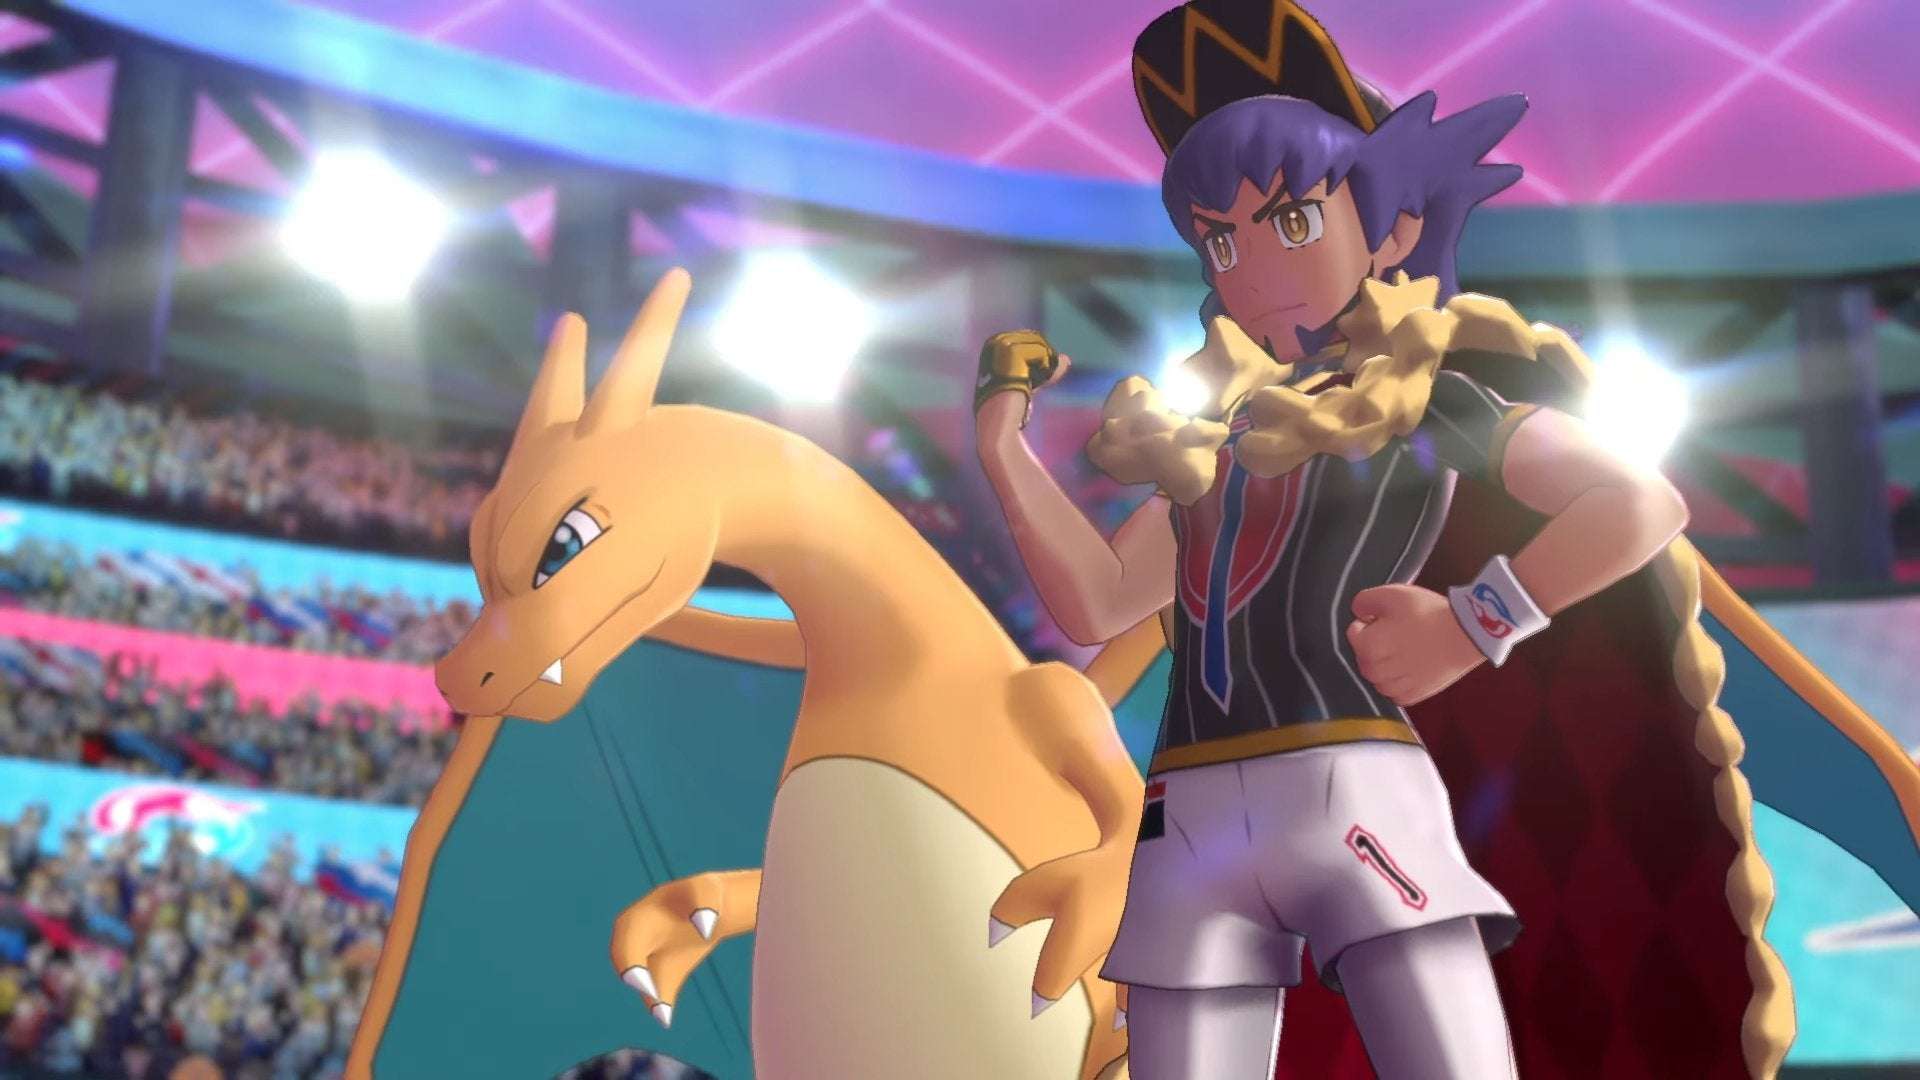 image for Pokémon Sword and Shield will be the first games without an Elite Four